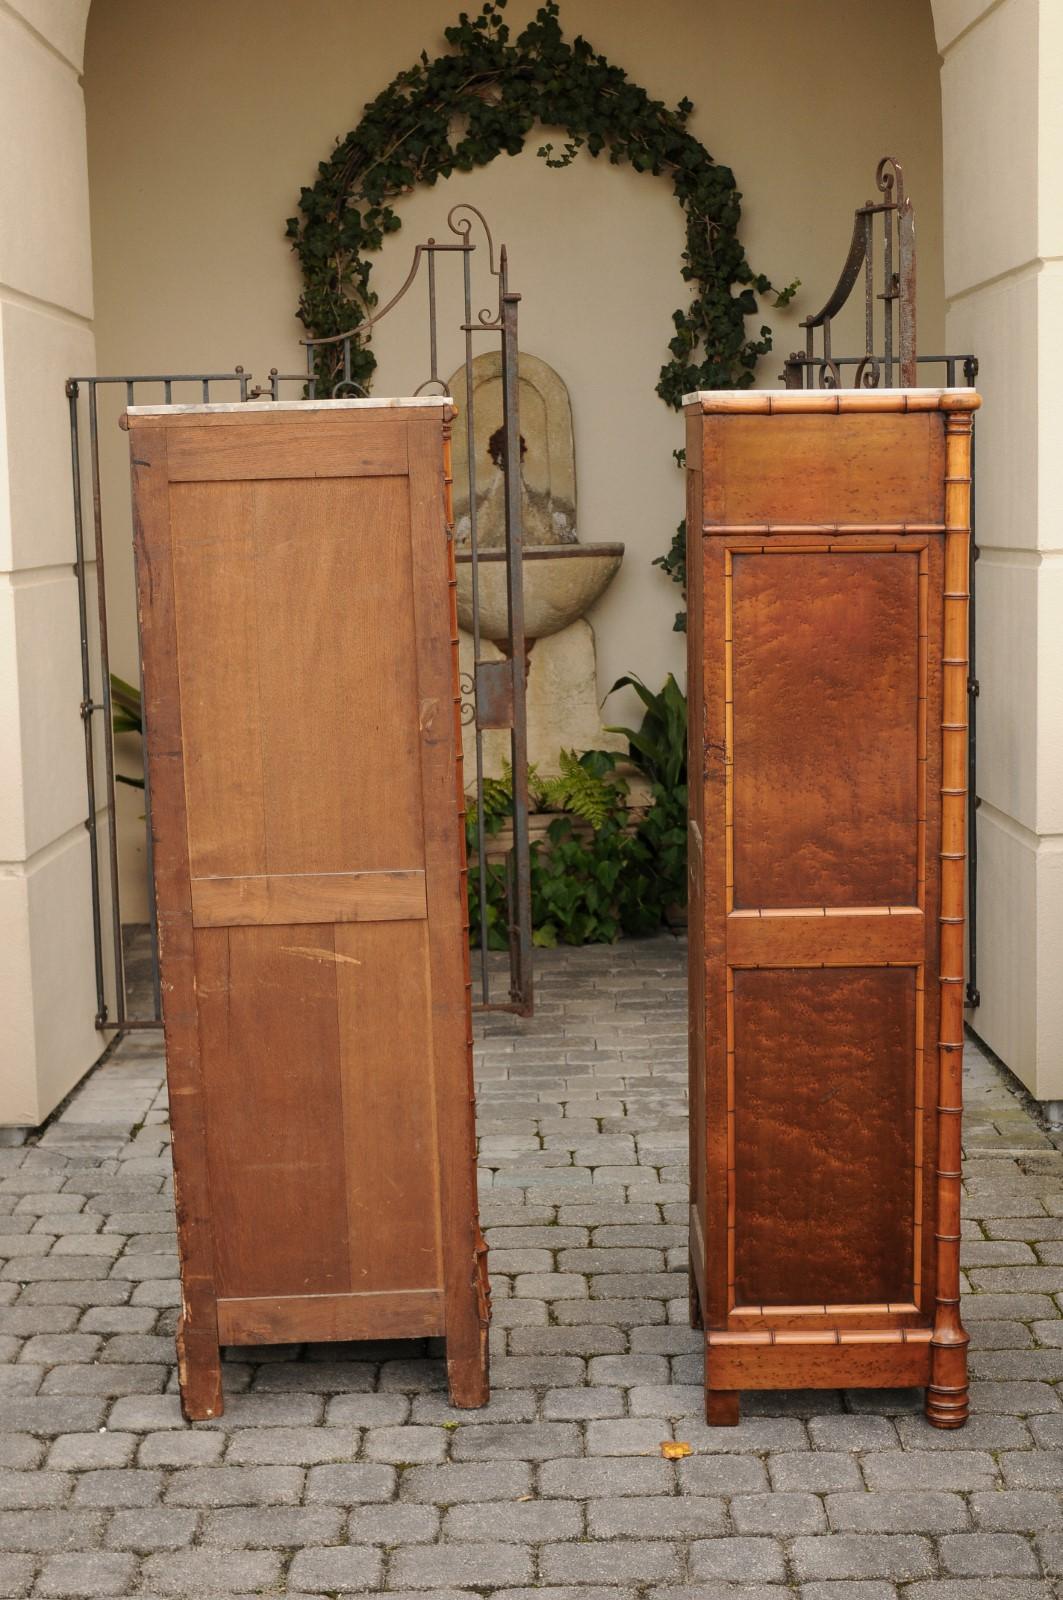 A pair of French faux bamboo and burl wood semainiers from the second quarter of the 19th century, with conforming marble tops and geometric design. Born at the end of the reign of France's last Emperor Napoleon III, each of this pair of tall and